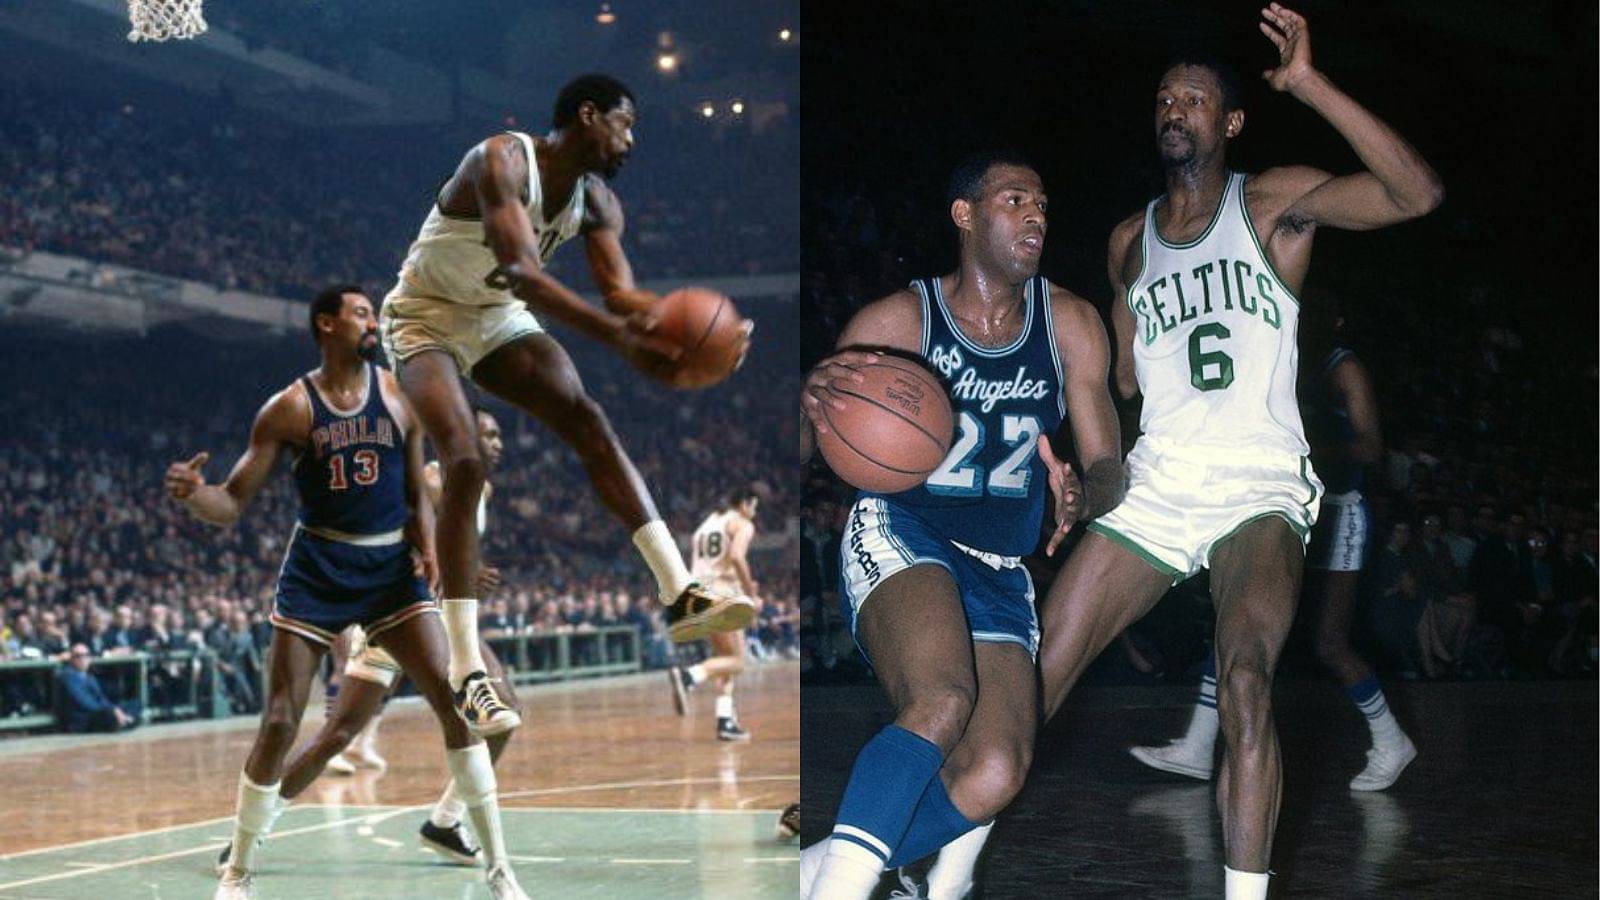 6ft 10” Bill Russell once won an MVP over 7’1” Wilt Chamberlain averaging 50 PPG and triple-double averaging Oscar Robertson